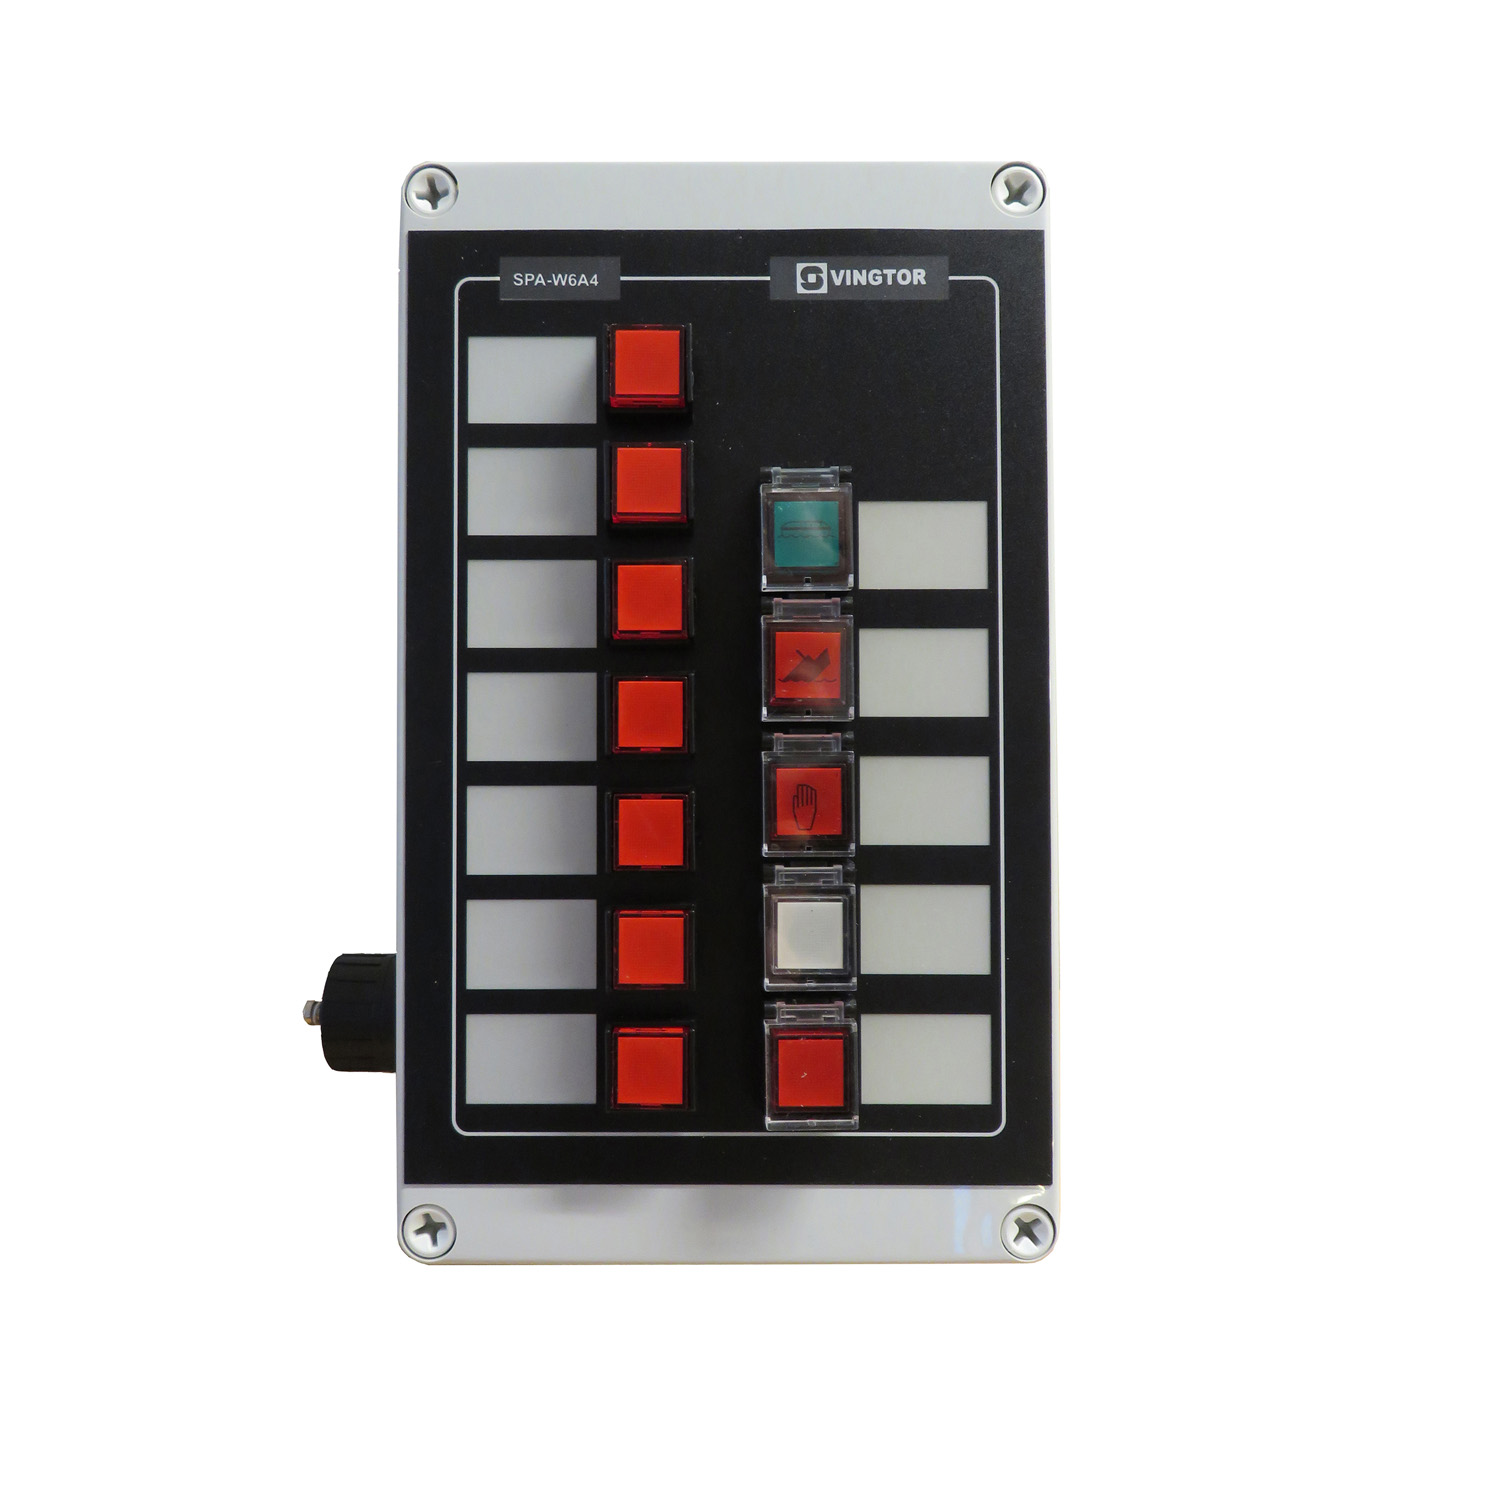 3005010203 SPA-W6A4-D dual weatherproof PA and alarm panel with 6 zones